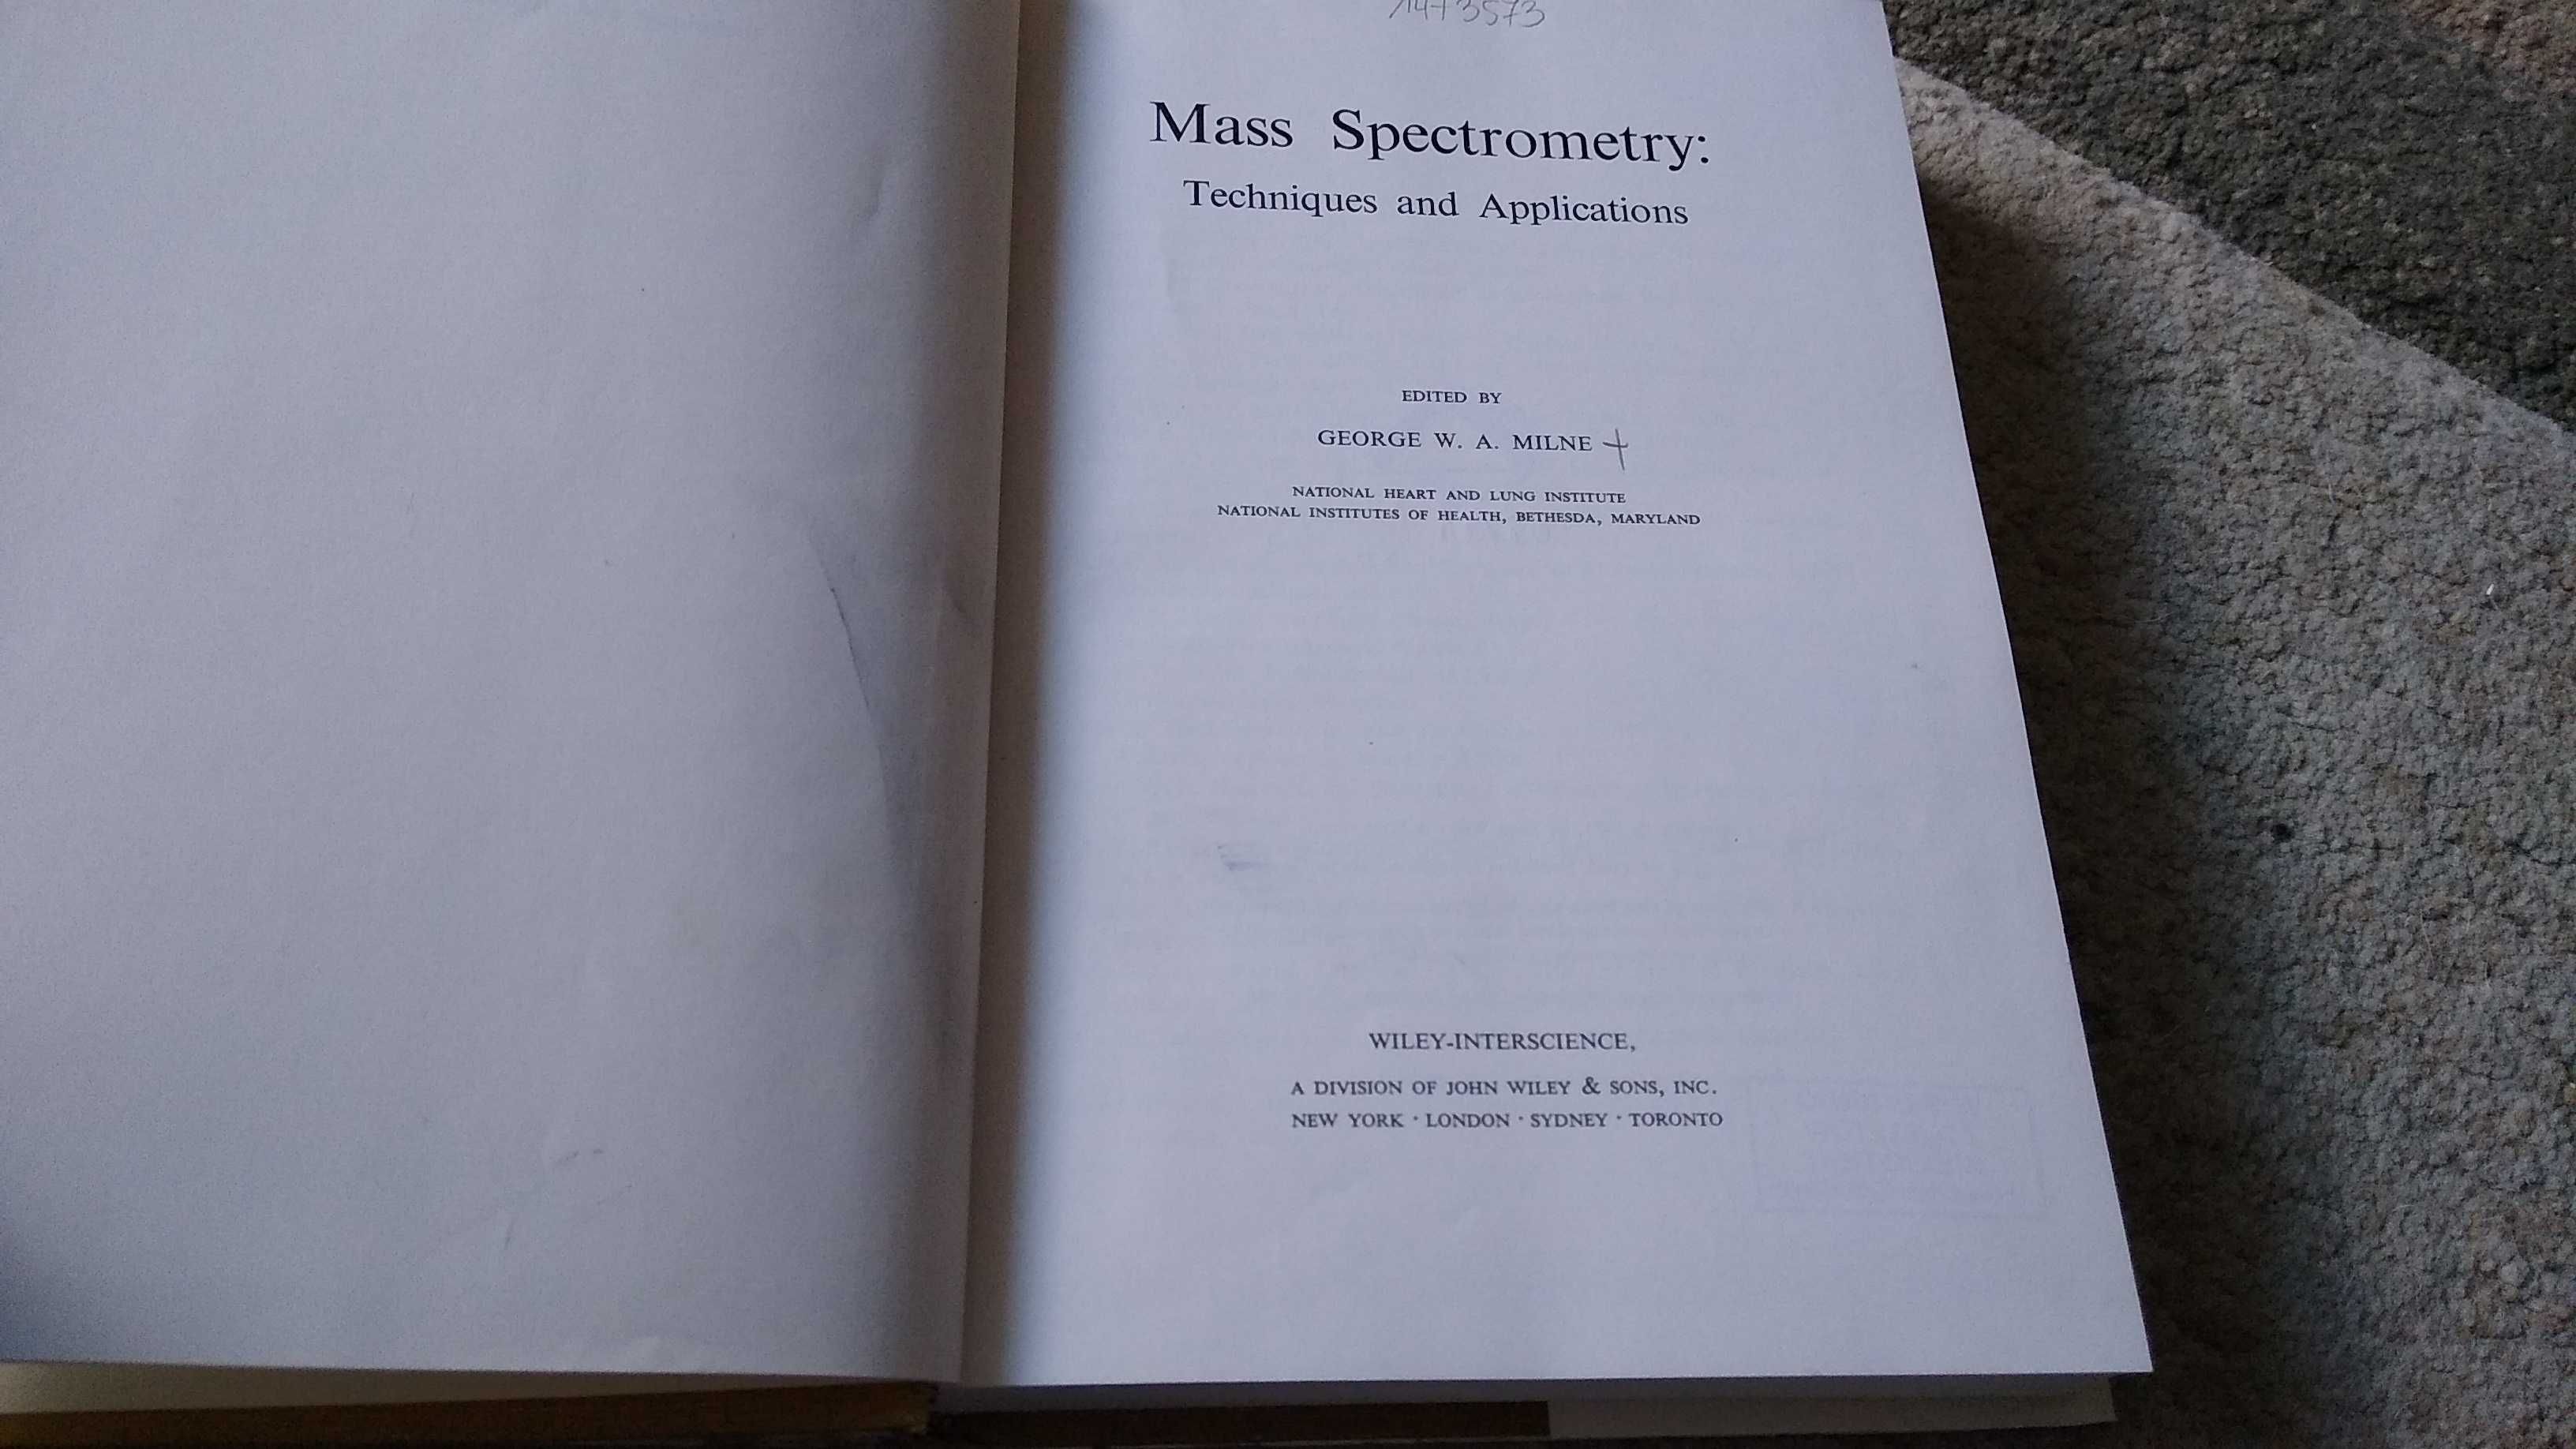 Mass spectrometry techniques and applications Milne